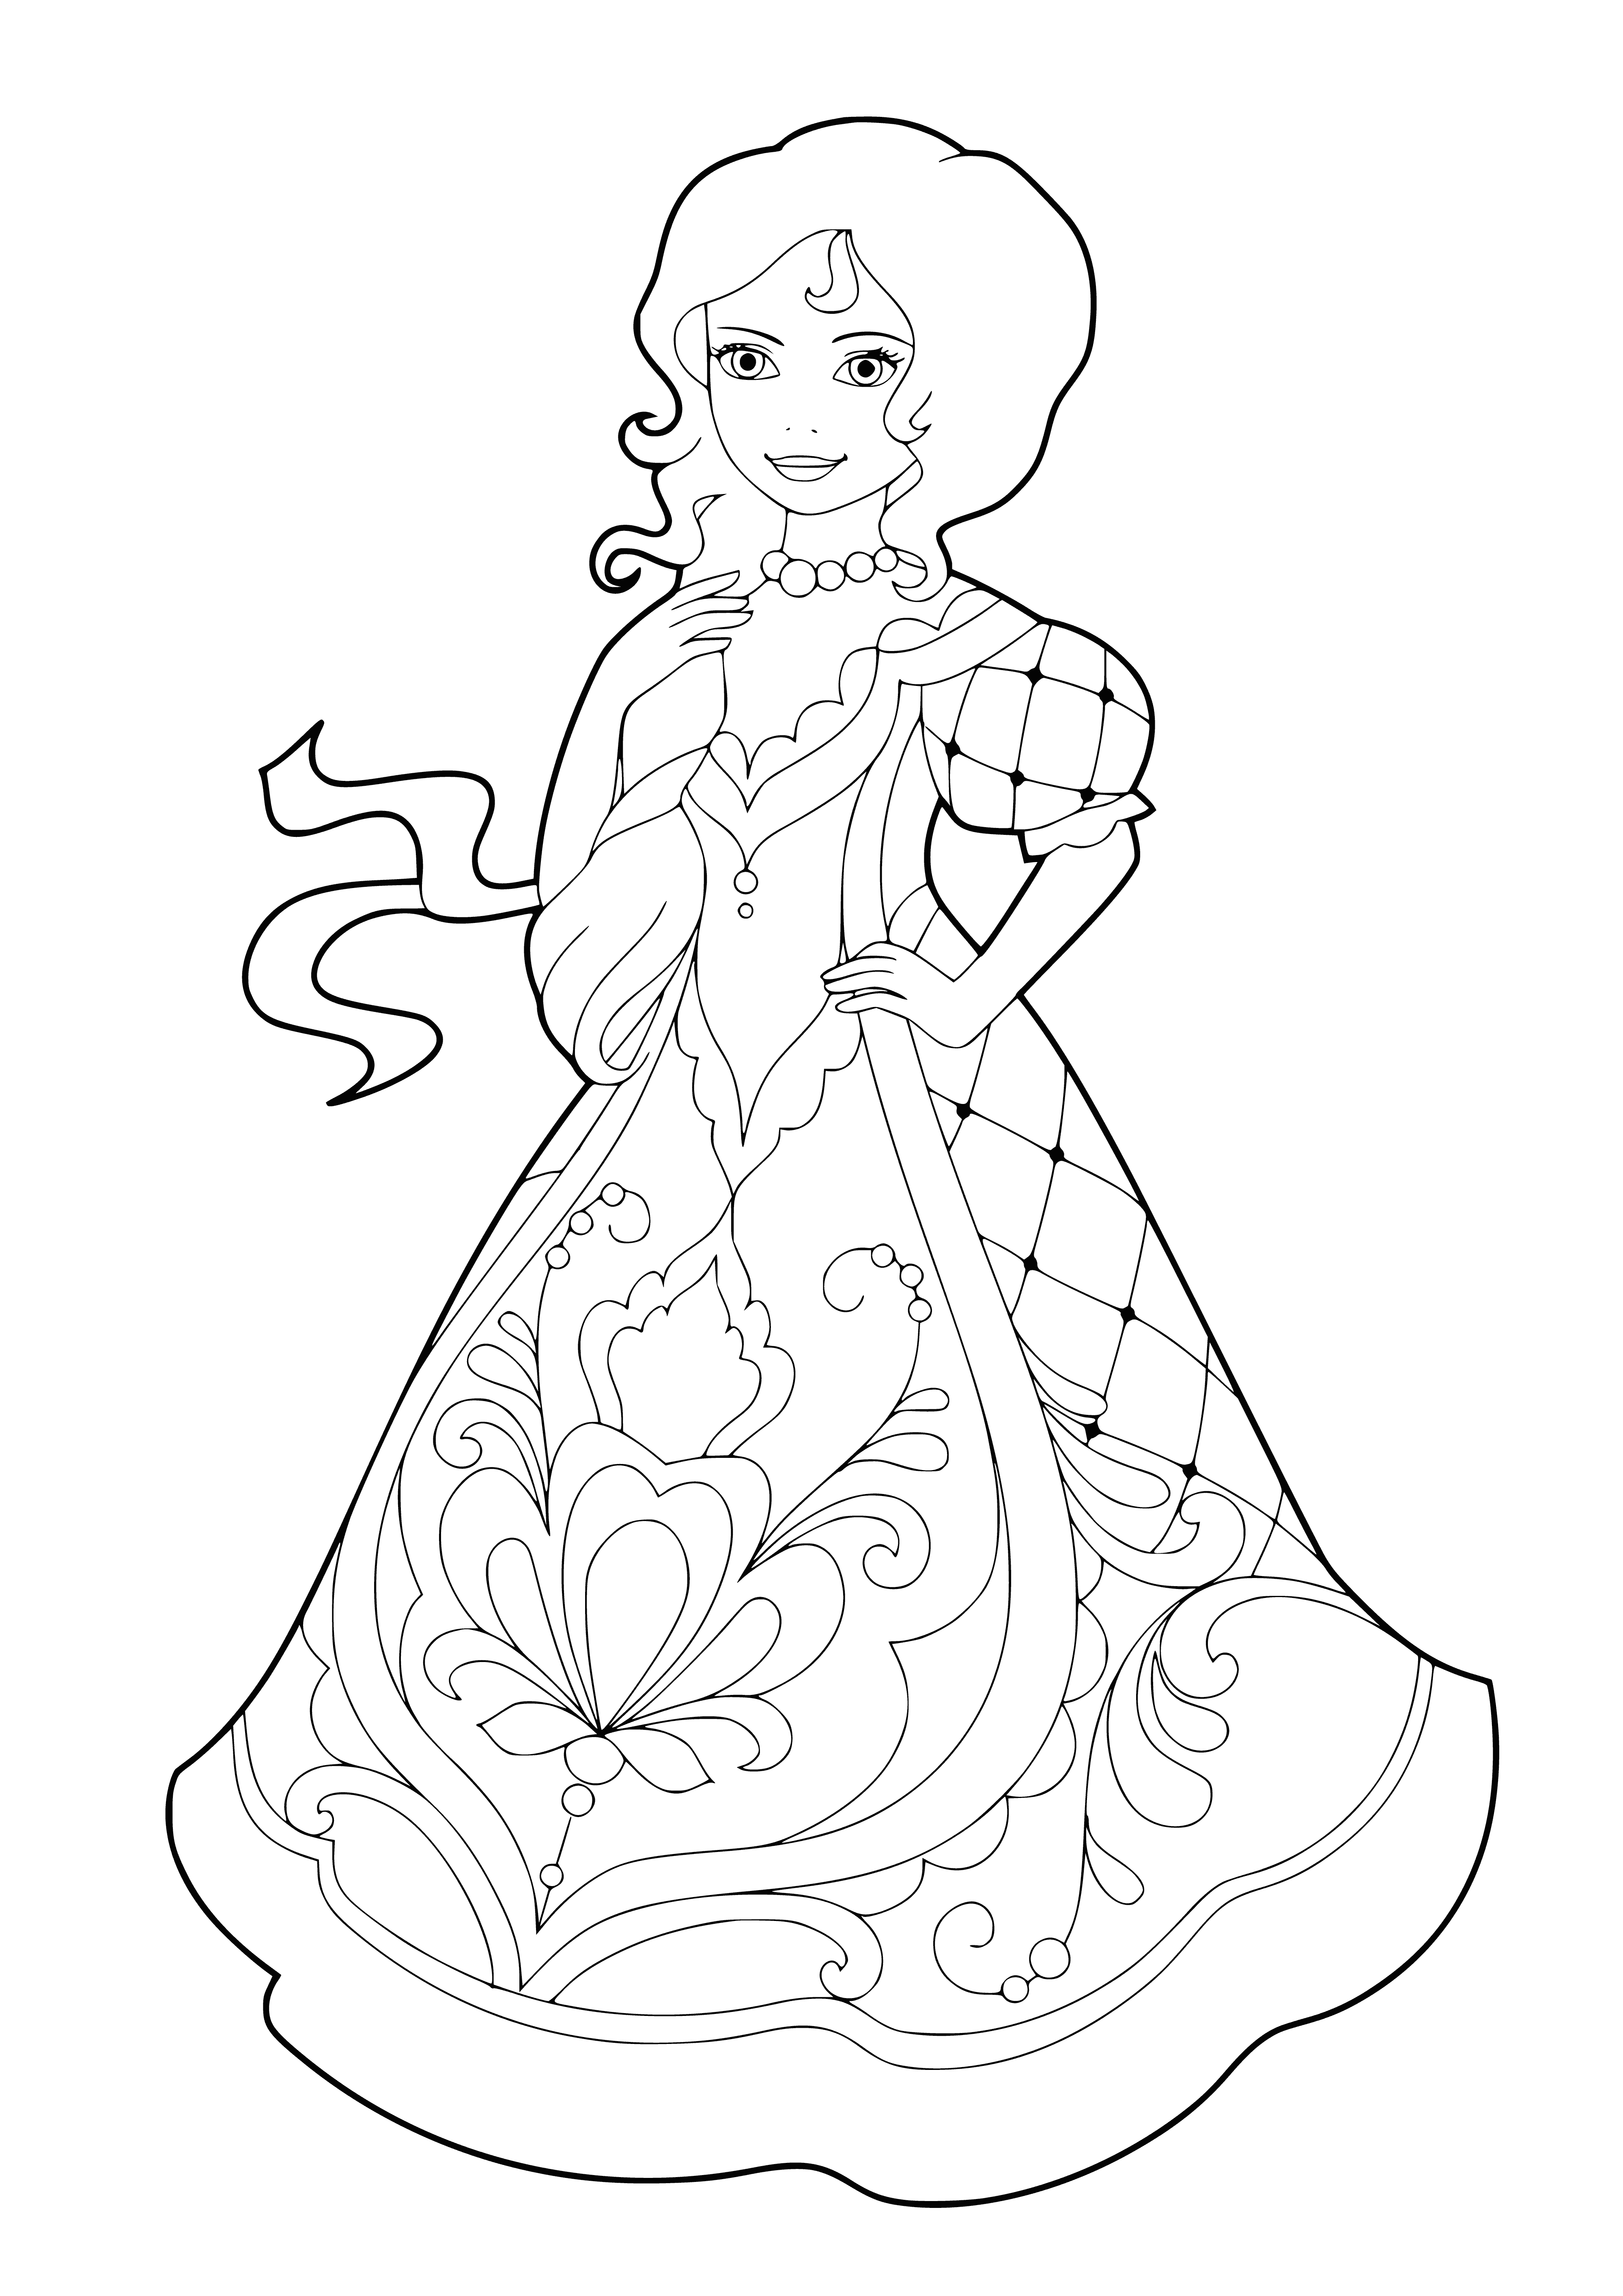 coloring page: Three beauties stand in line, wearing white dresses with intricate designs; long blonde or light brown hair, blue eyes and pale skin.